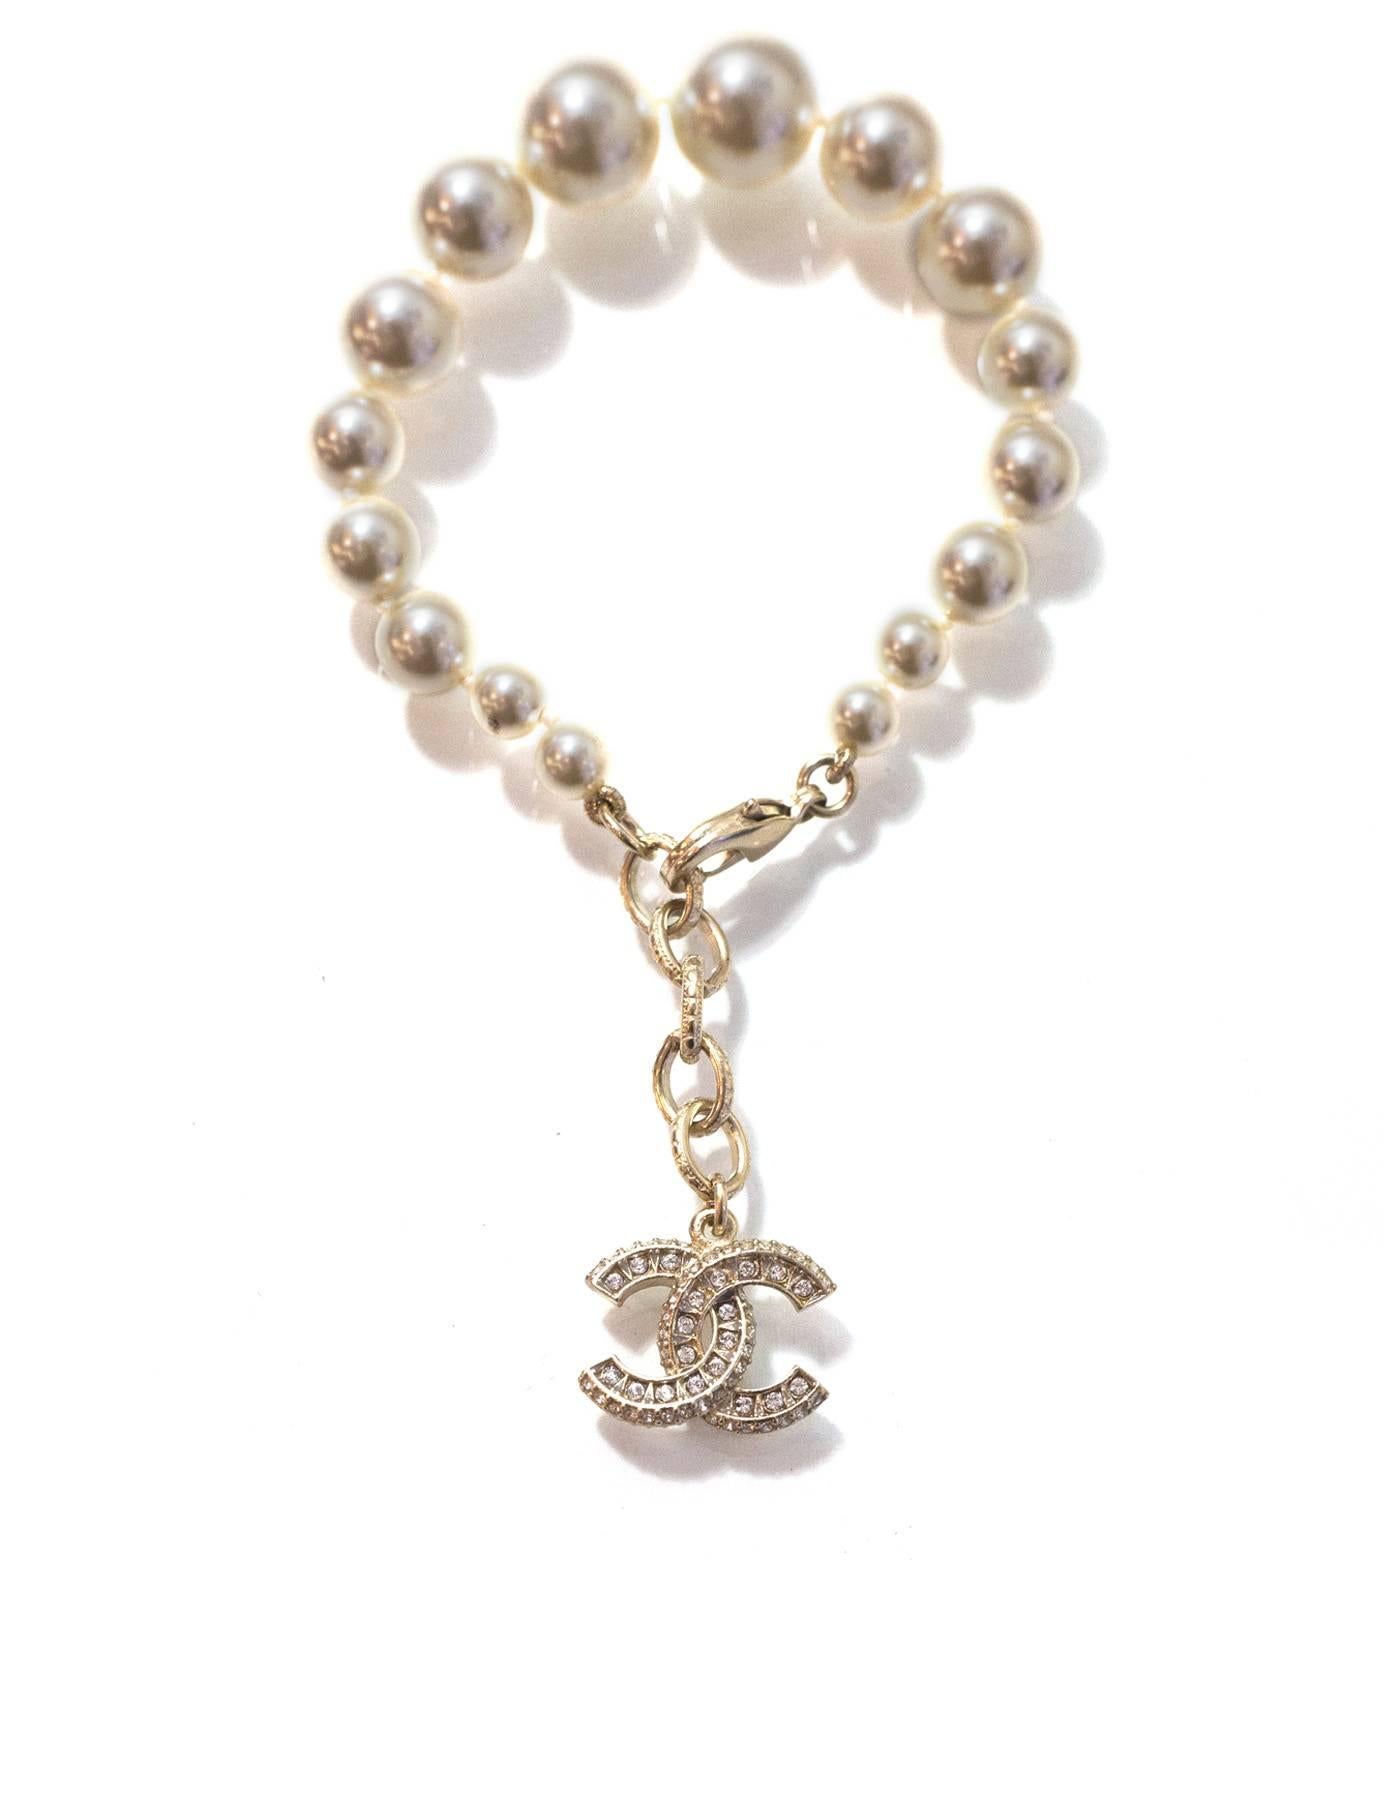 Chanel Graduated Pearl & Crystal CC Pendant Bracelet

Made In: France
Year of Production: 2016
Color: Pale goldtone and ivory
Materials: Faux pearl, metal and crystal
Closure/Opening: Lobster claw clasp
Stamp: P16 CC V
Overall Condition: